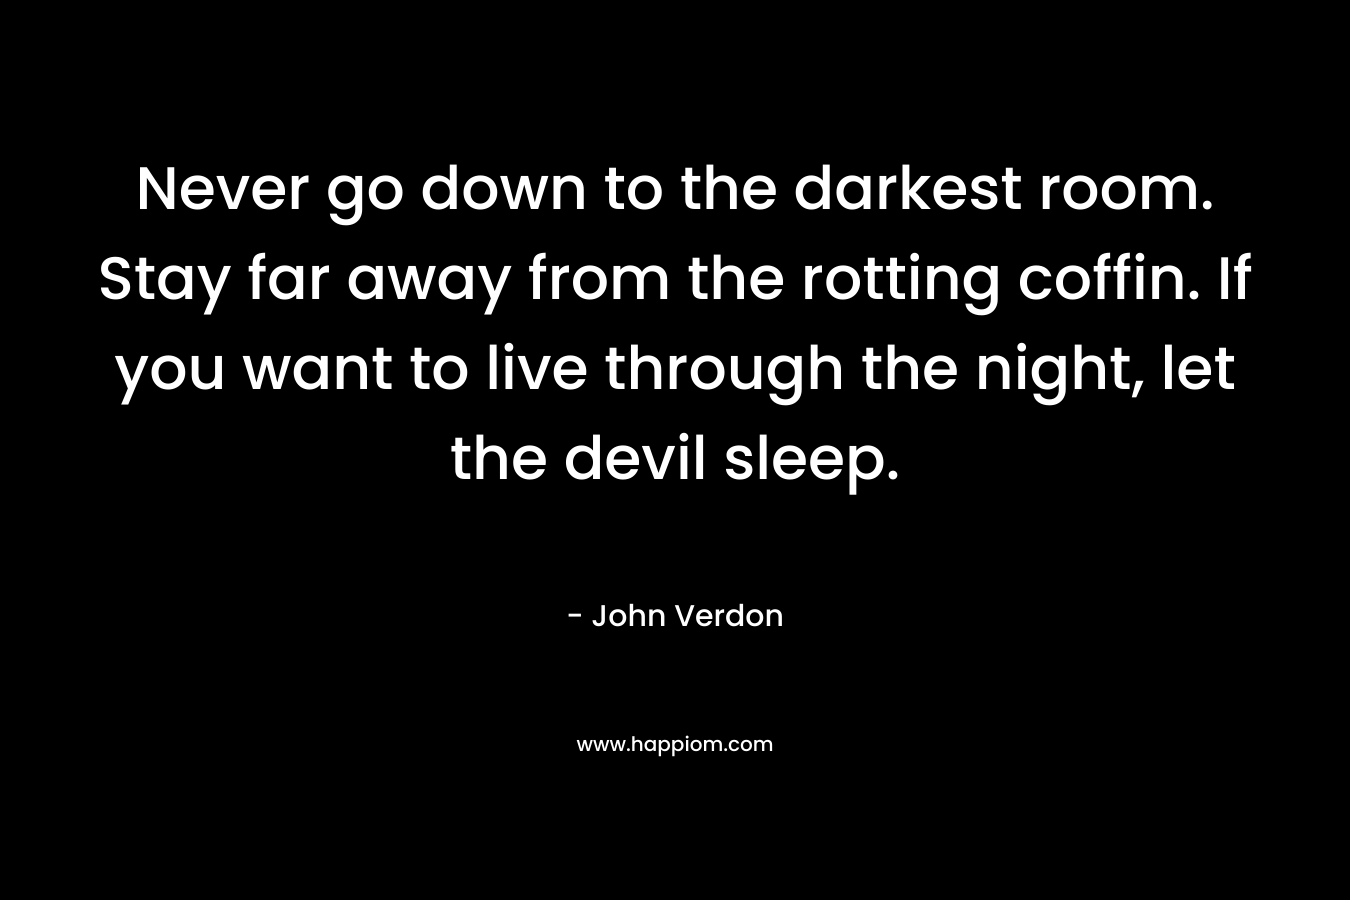 Never go down to the darkest room. Stay far away from the rotting coffin. If you want to live through the night, let the devil sleep.